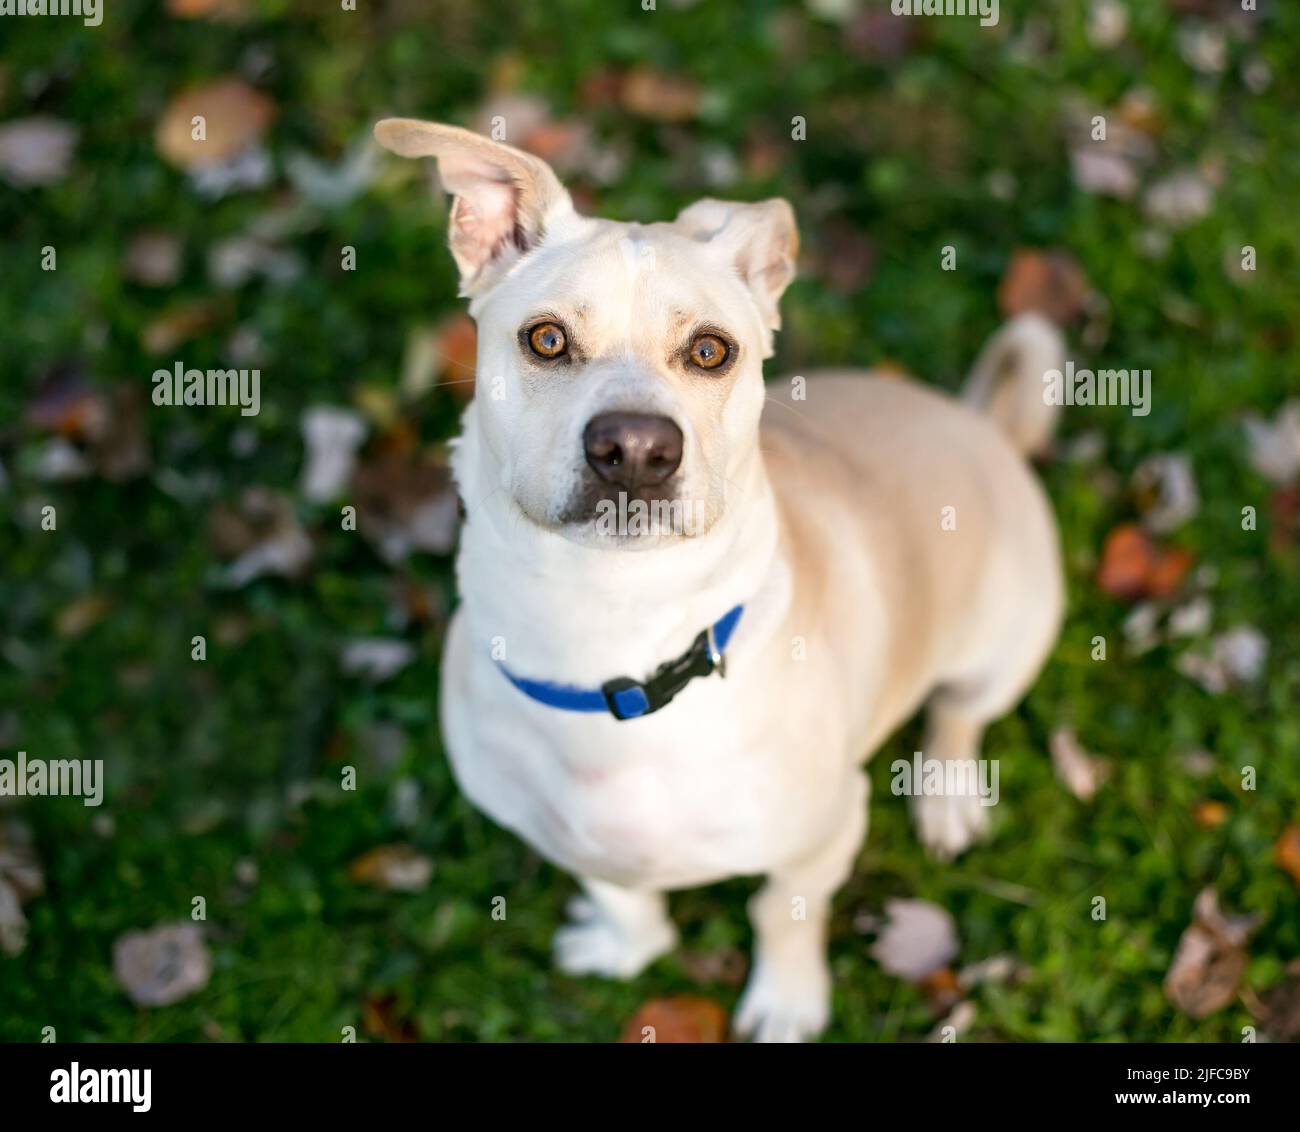 A mixed breed dog with floppy ears sitting outdoors and looking up at the camera Stock Photo